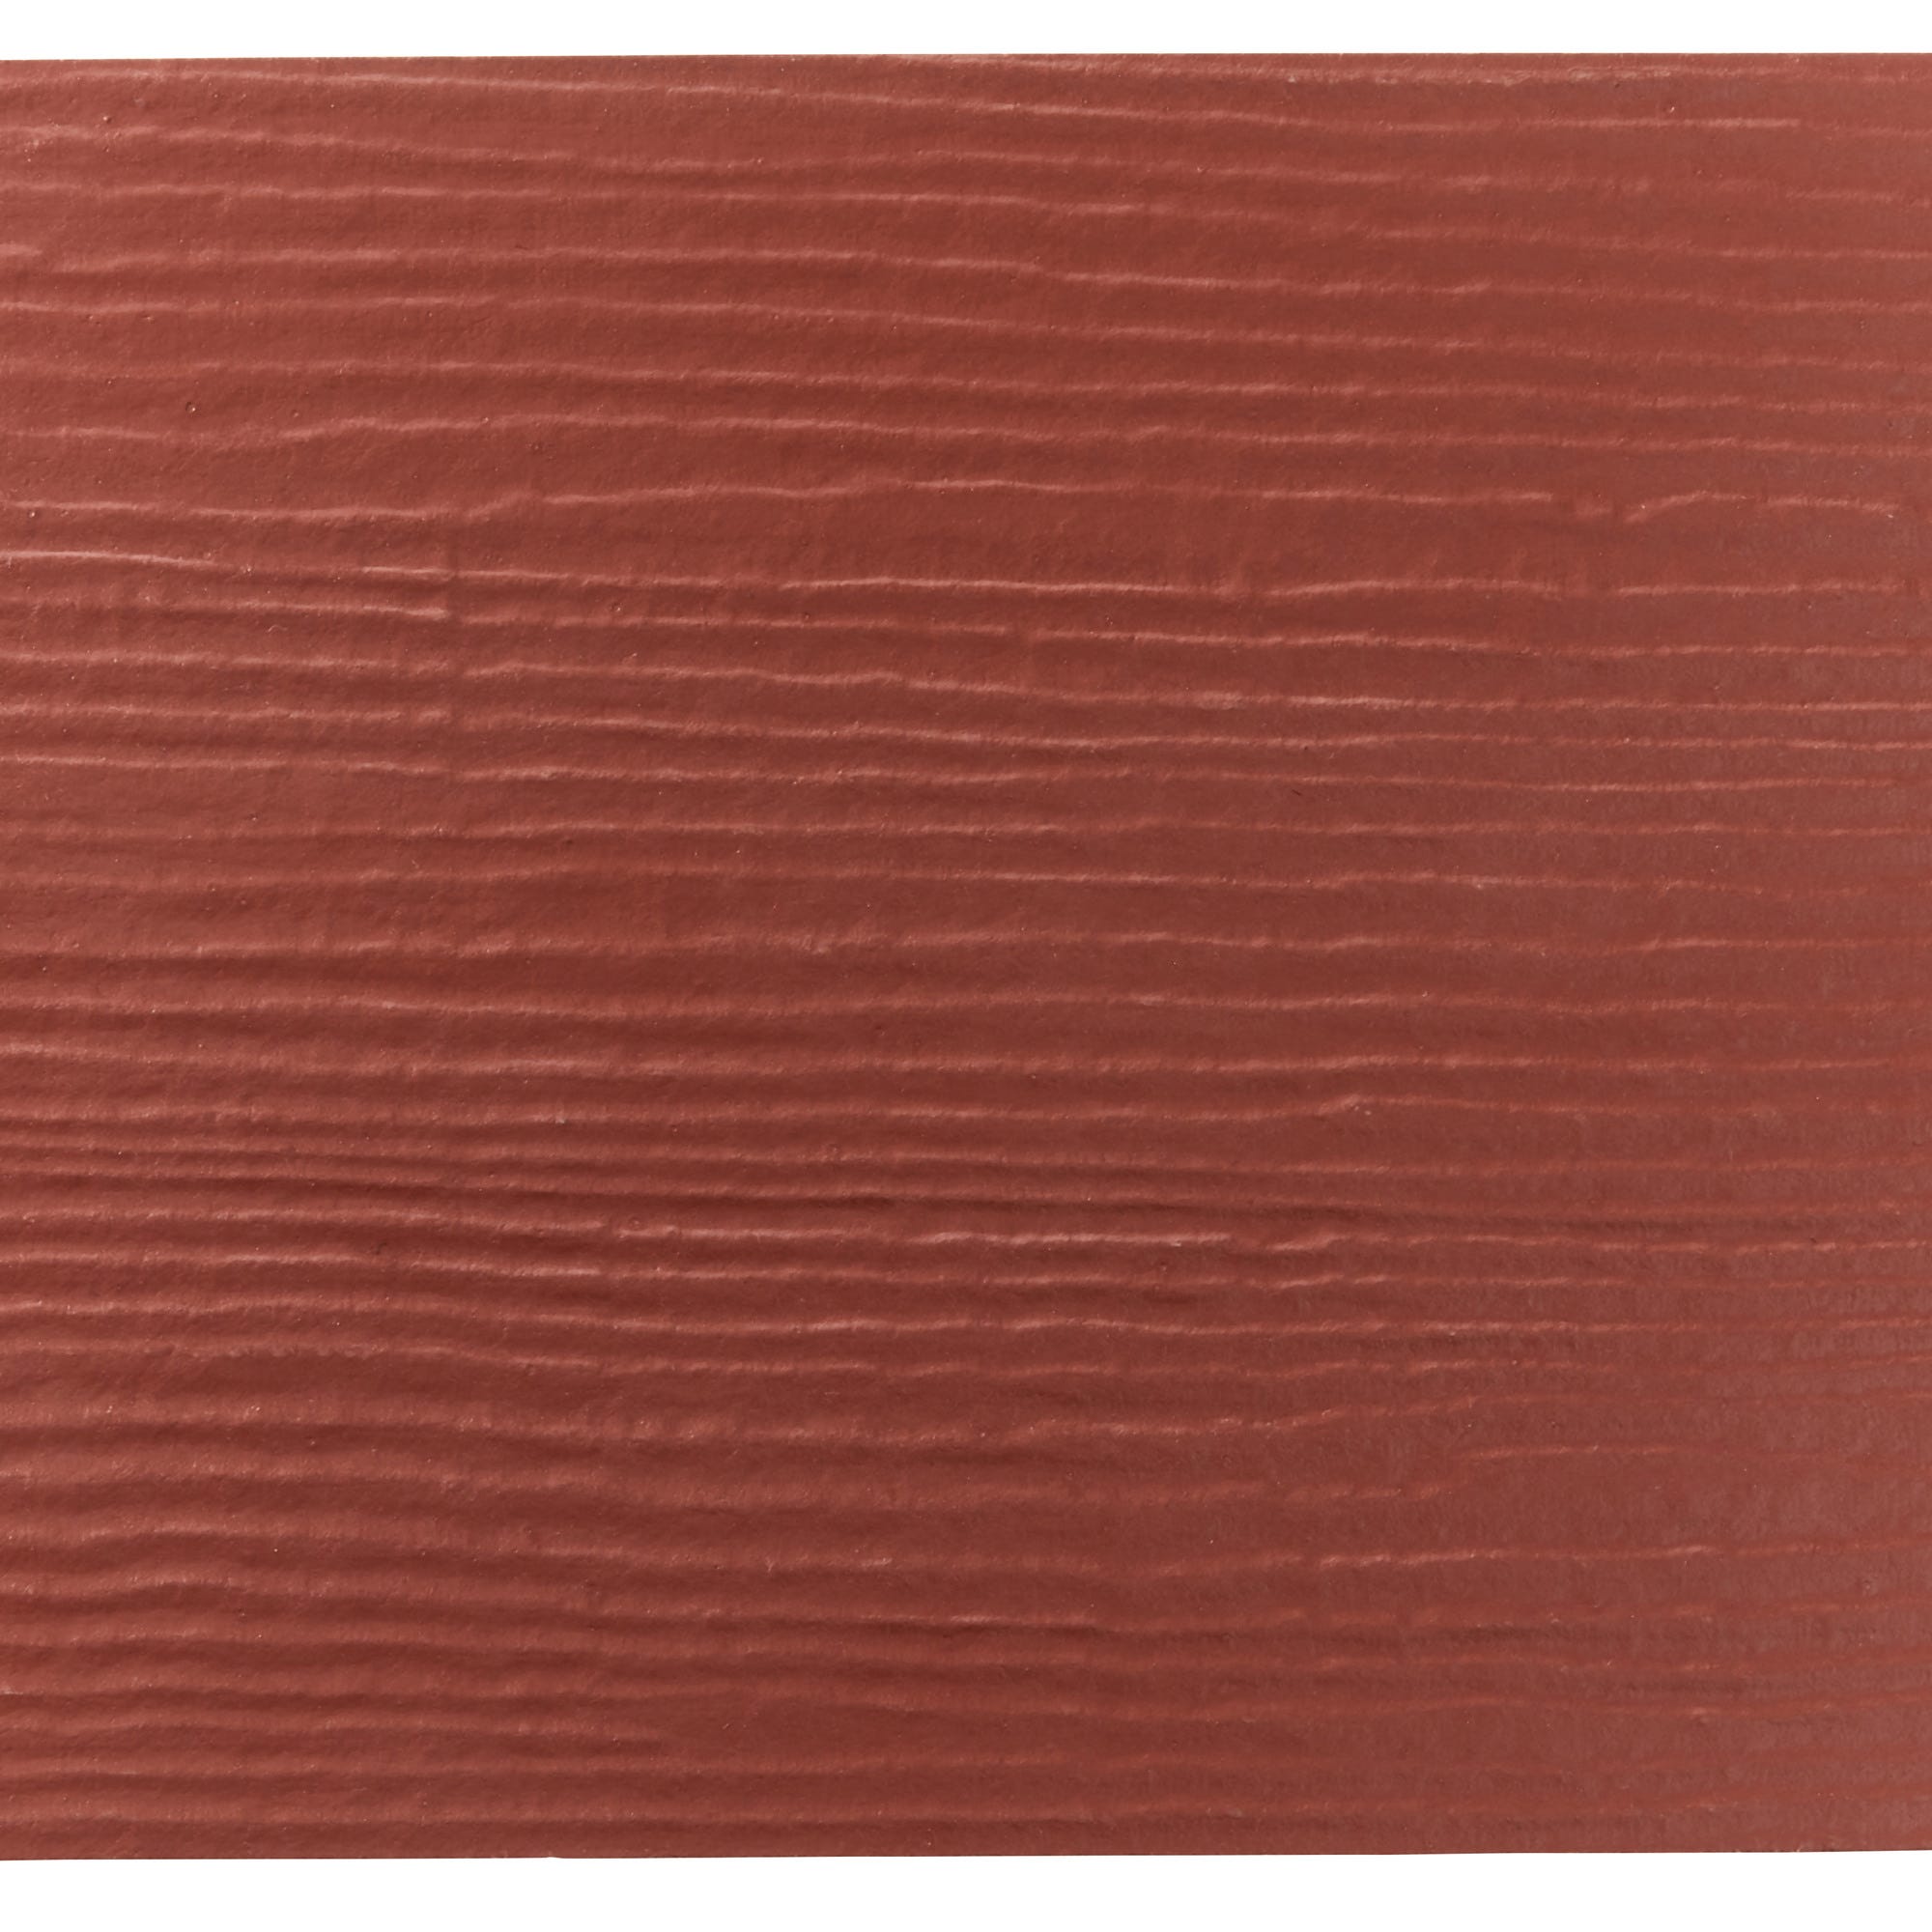 Clin pour bardage rouge traditionnel L.3600 × l.180 × Ep.8 mm HardiePlank Cedar 5